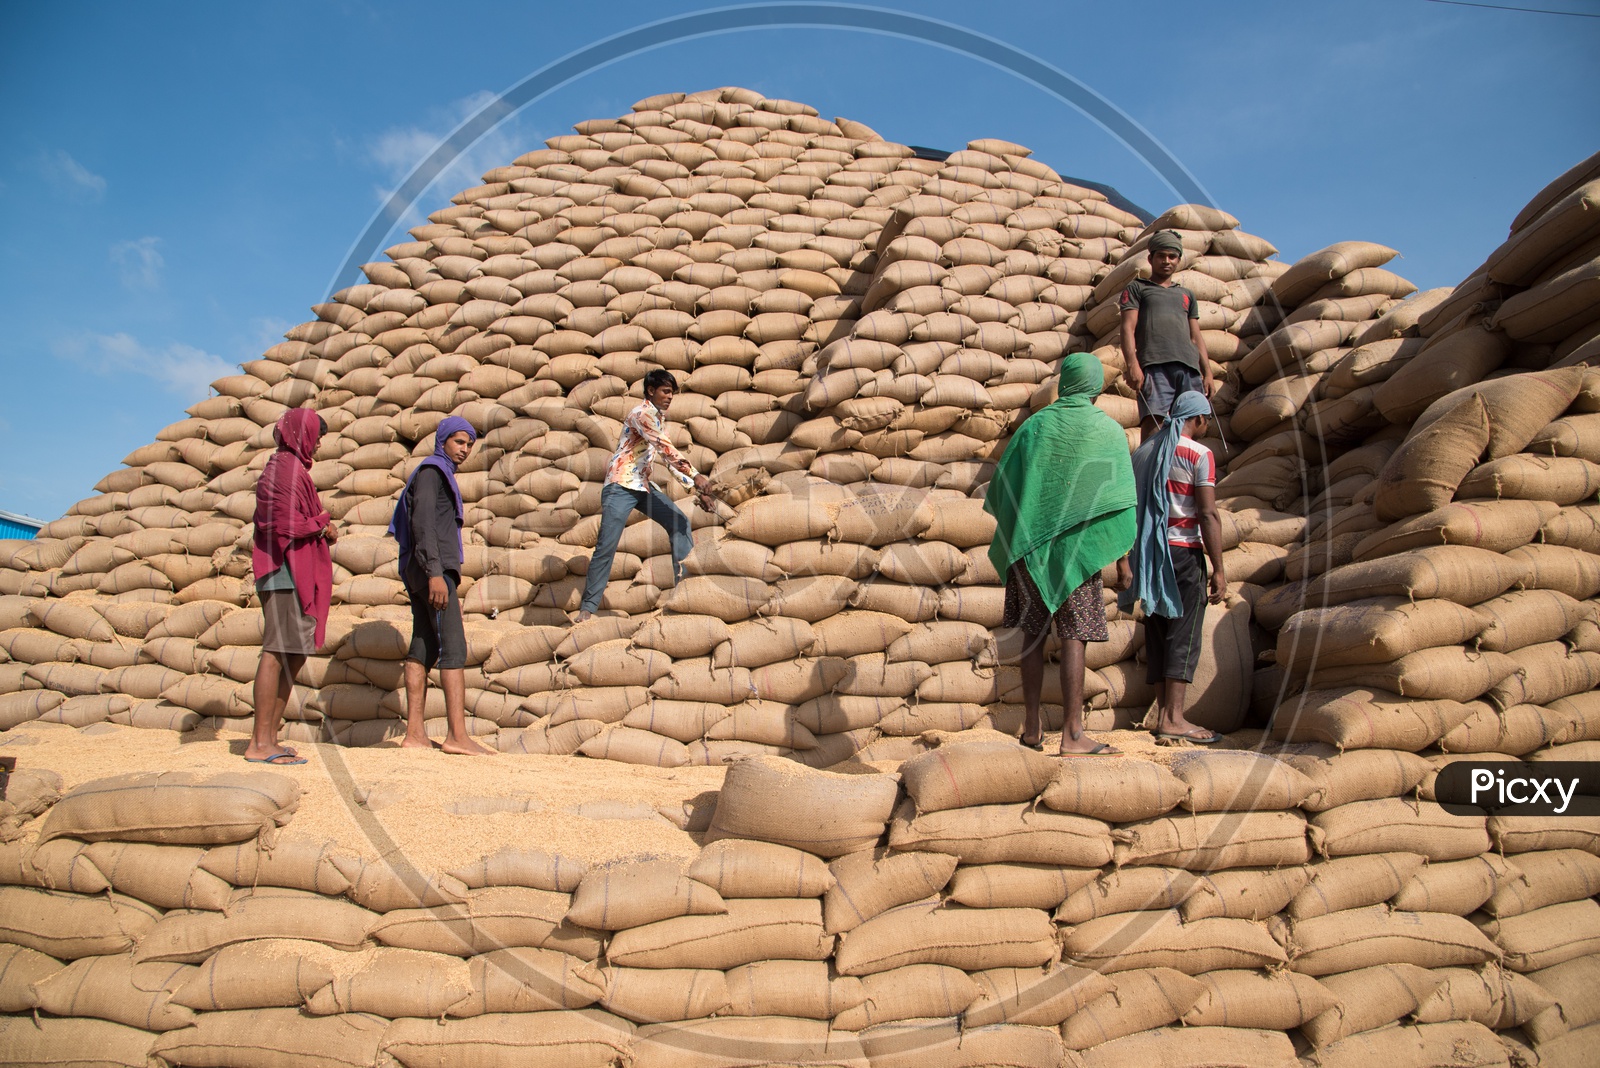 Workers at a Rice Mill in Telangana